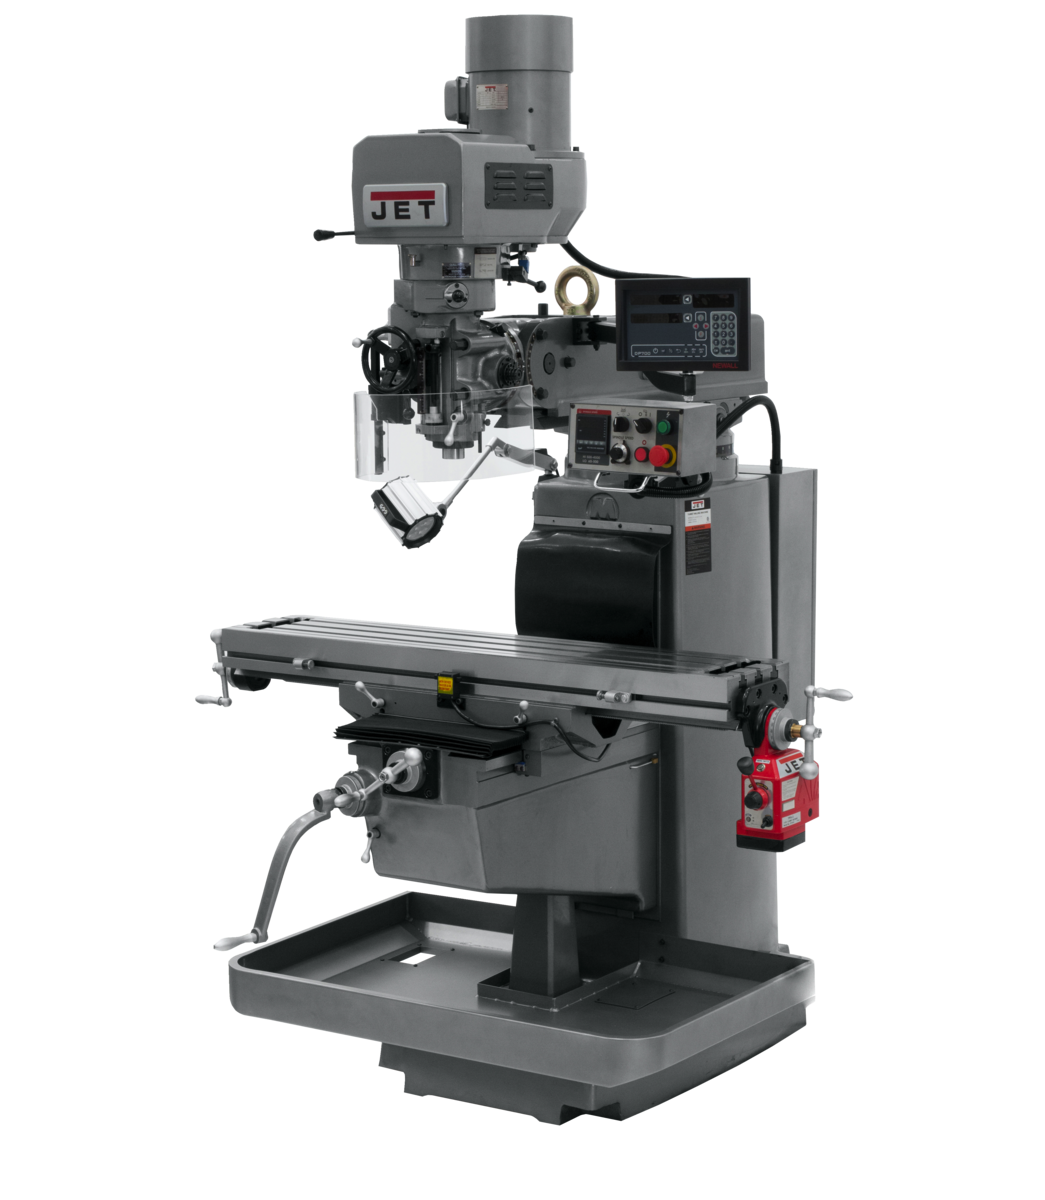 JTM-1050EVS2/230 Mill With 3-Axis Newall DP700 DRO (Quill) With X-Axis Powerfeed